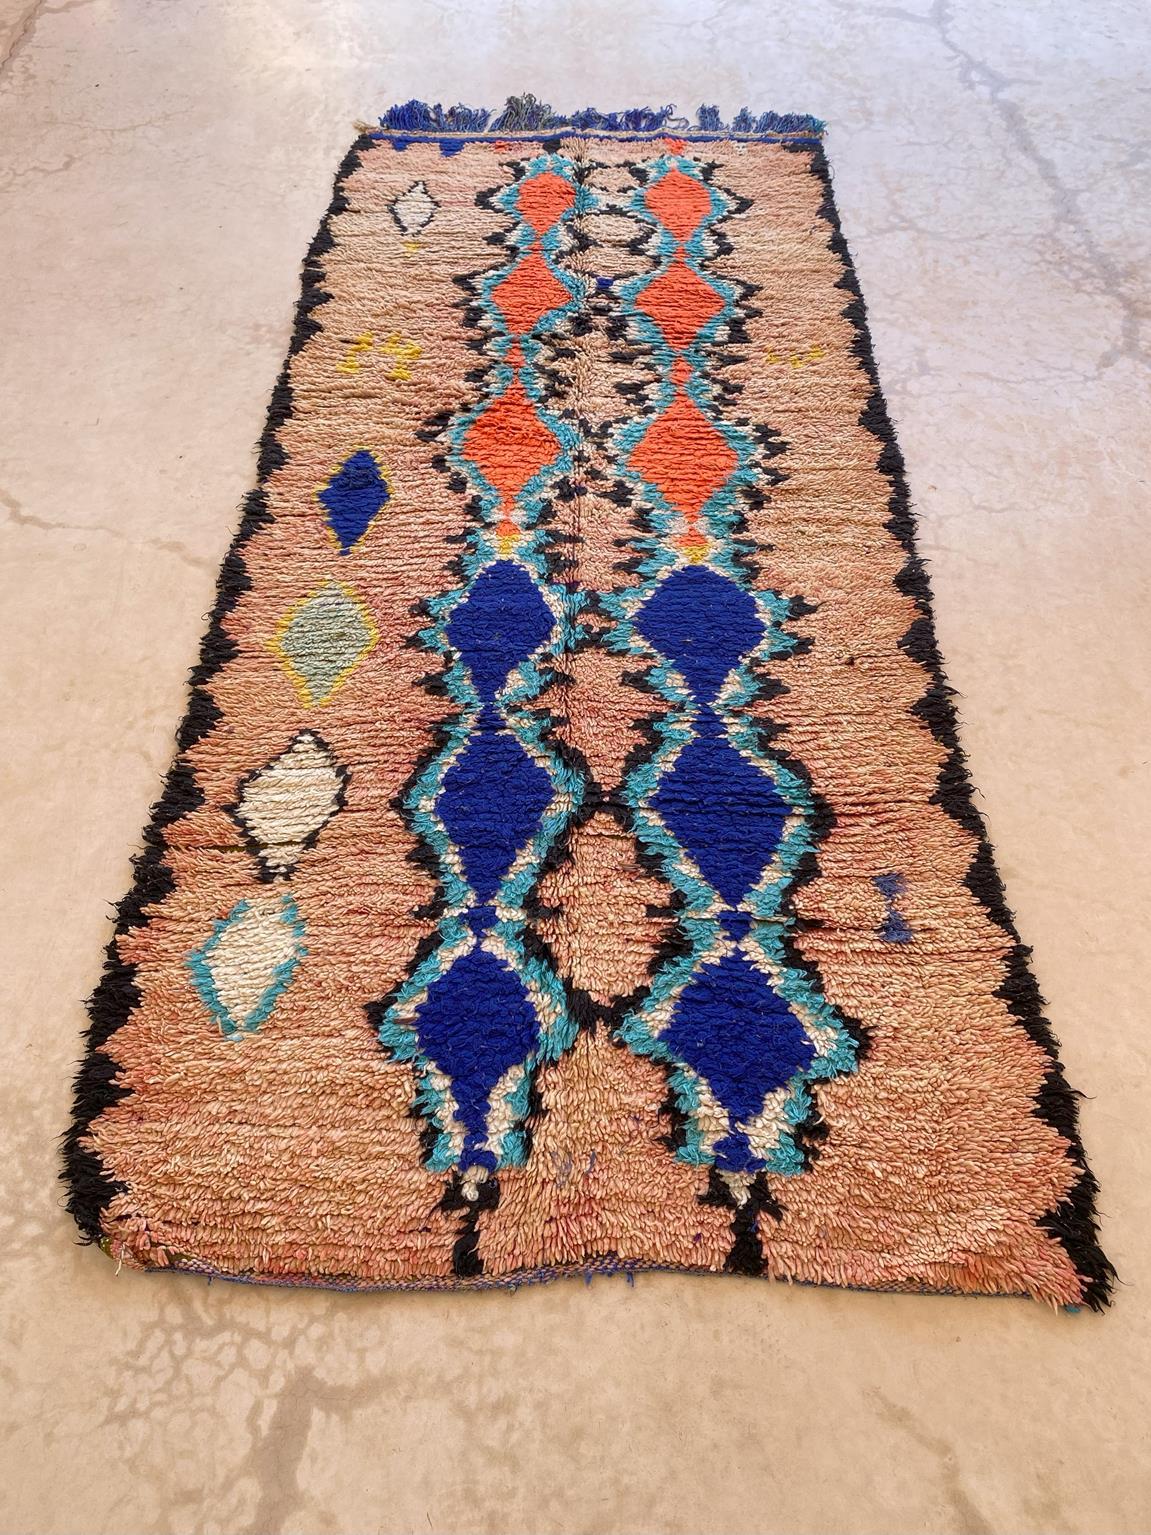 Vintage Moroccan Azilal rug - Salmon/blue - 4.3x9.6feet / 132x295cm In Good Condition For Sale In Marrakech, MA